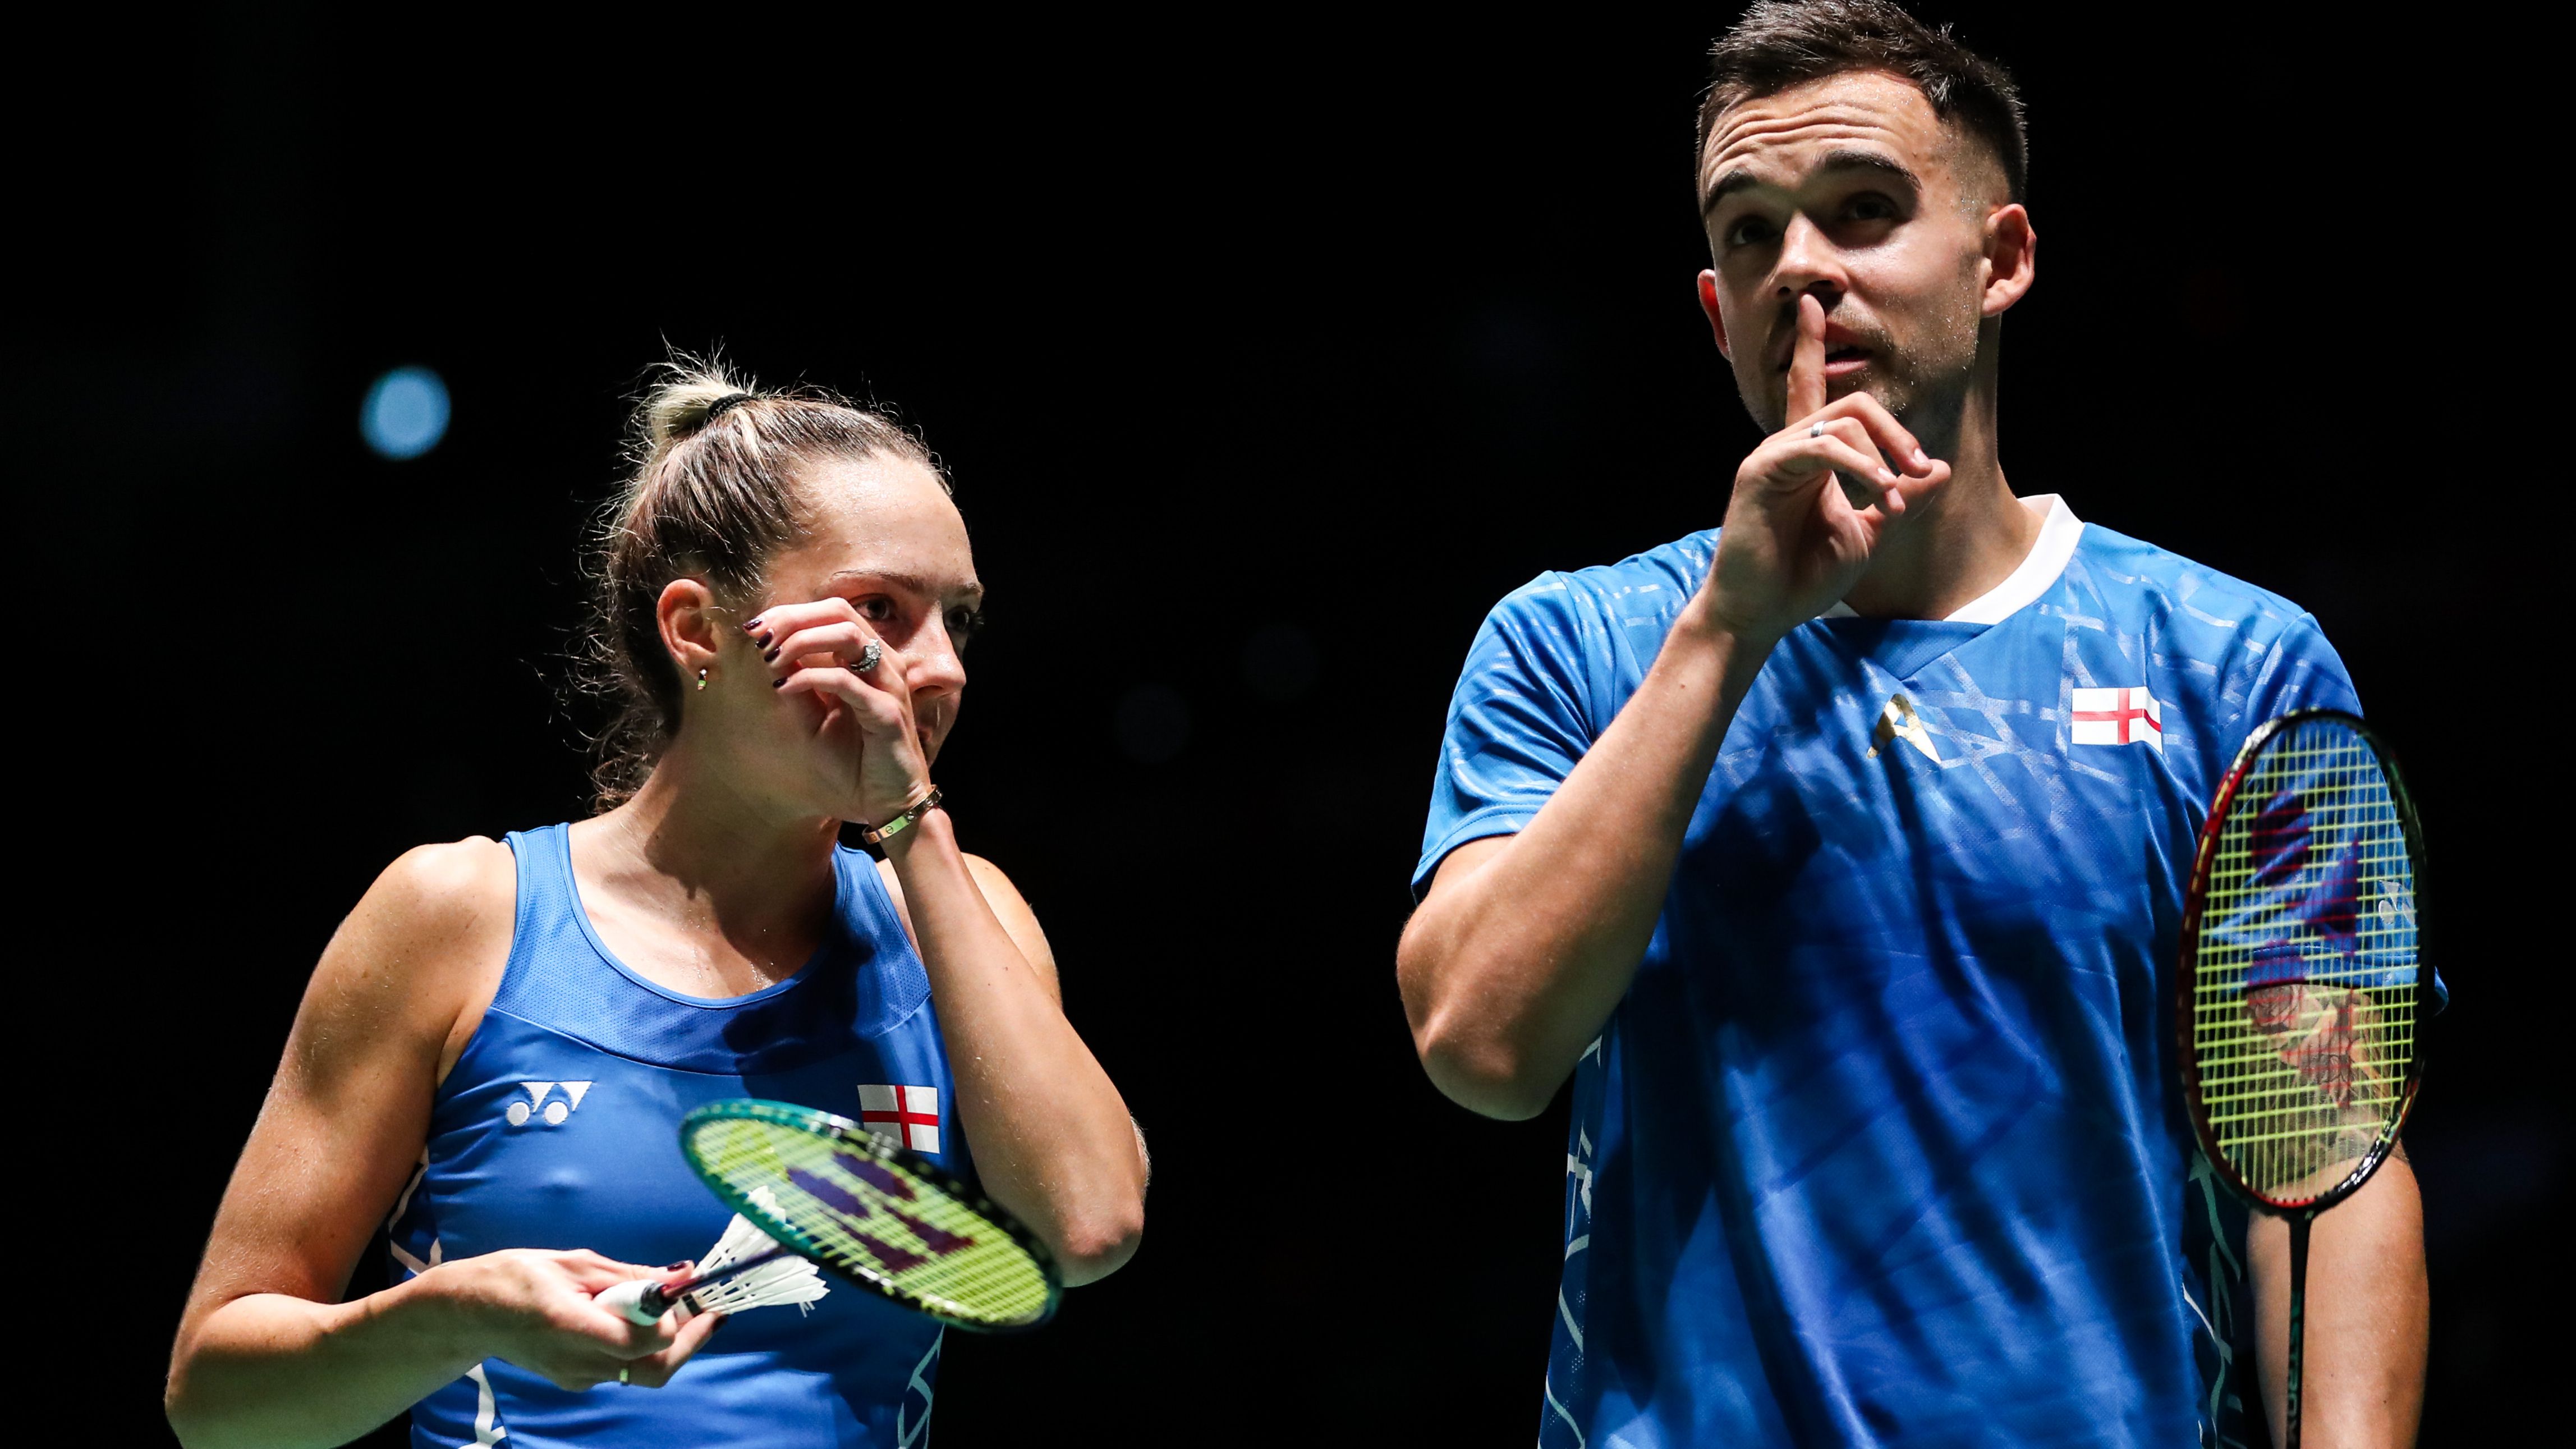 Watch All England Badminton Championships live - Live